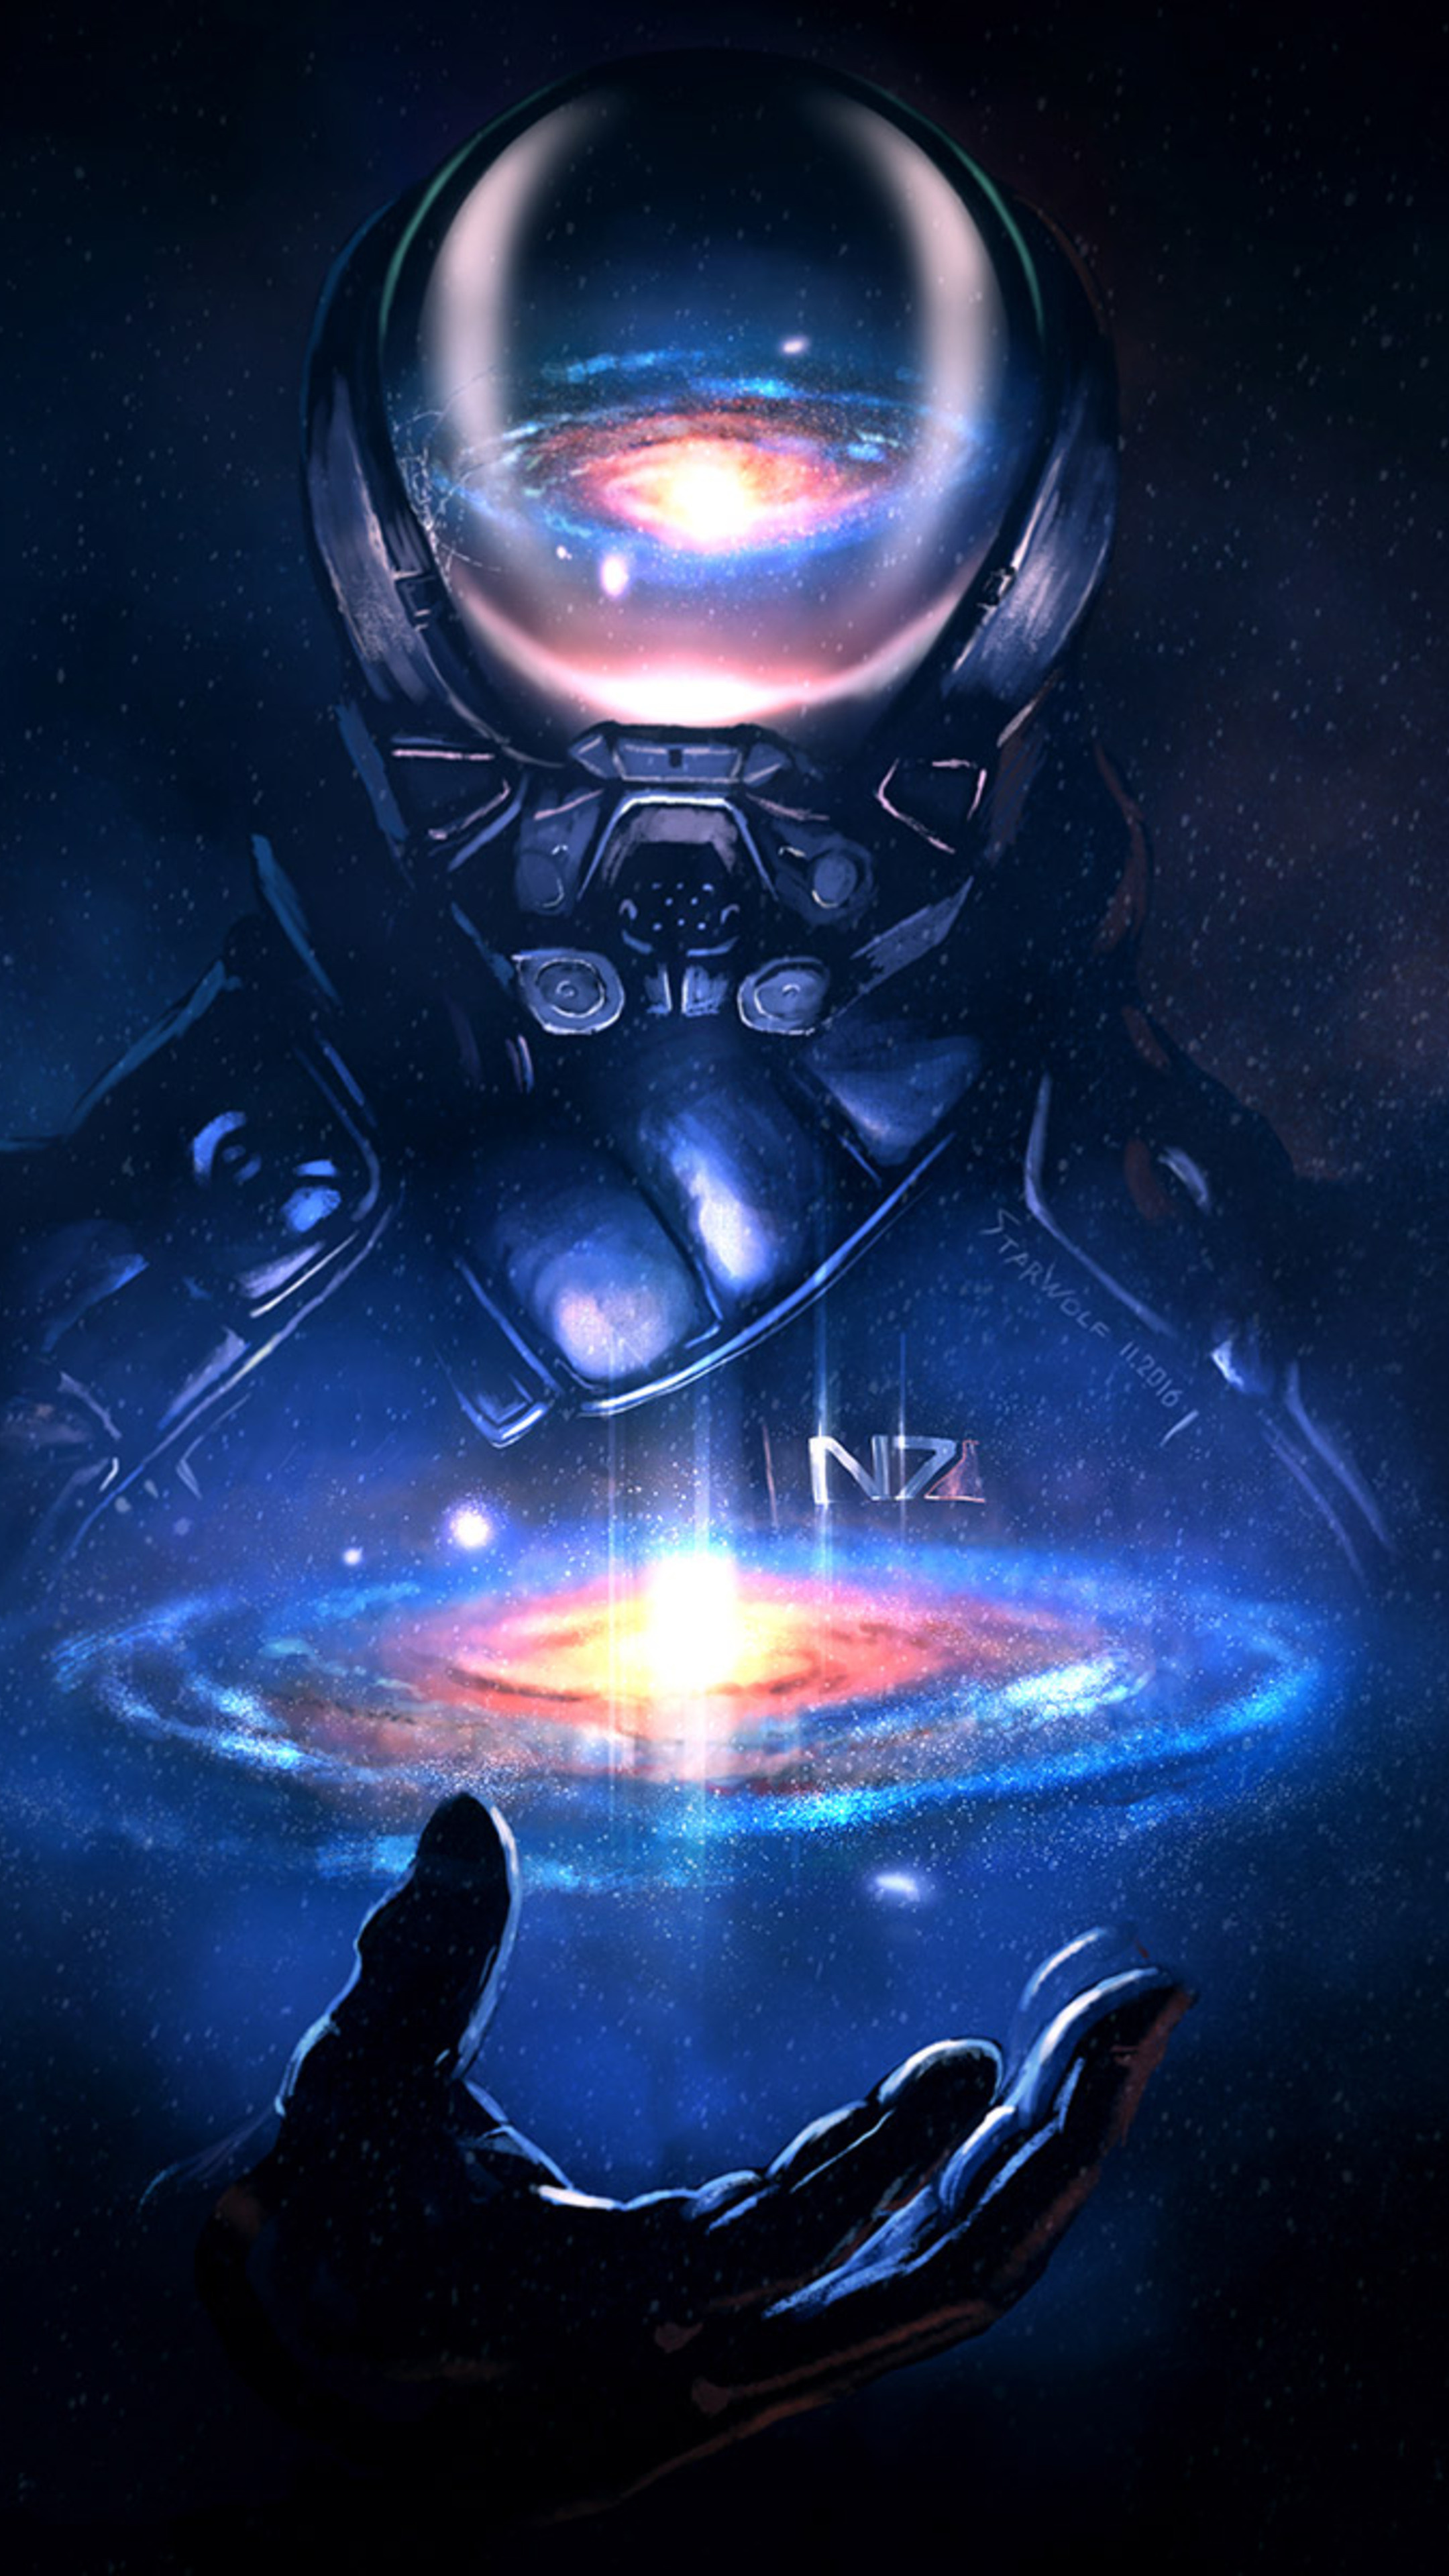 Mass Effect, Andromeda artwork, Sony Xperia wallpapers, Stunning 4K graphics, 2160x3840 4K Handy